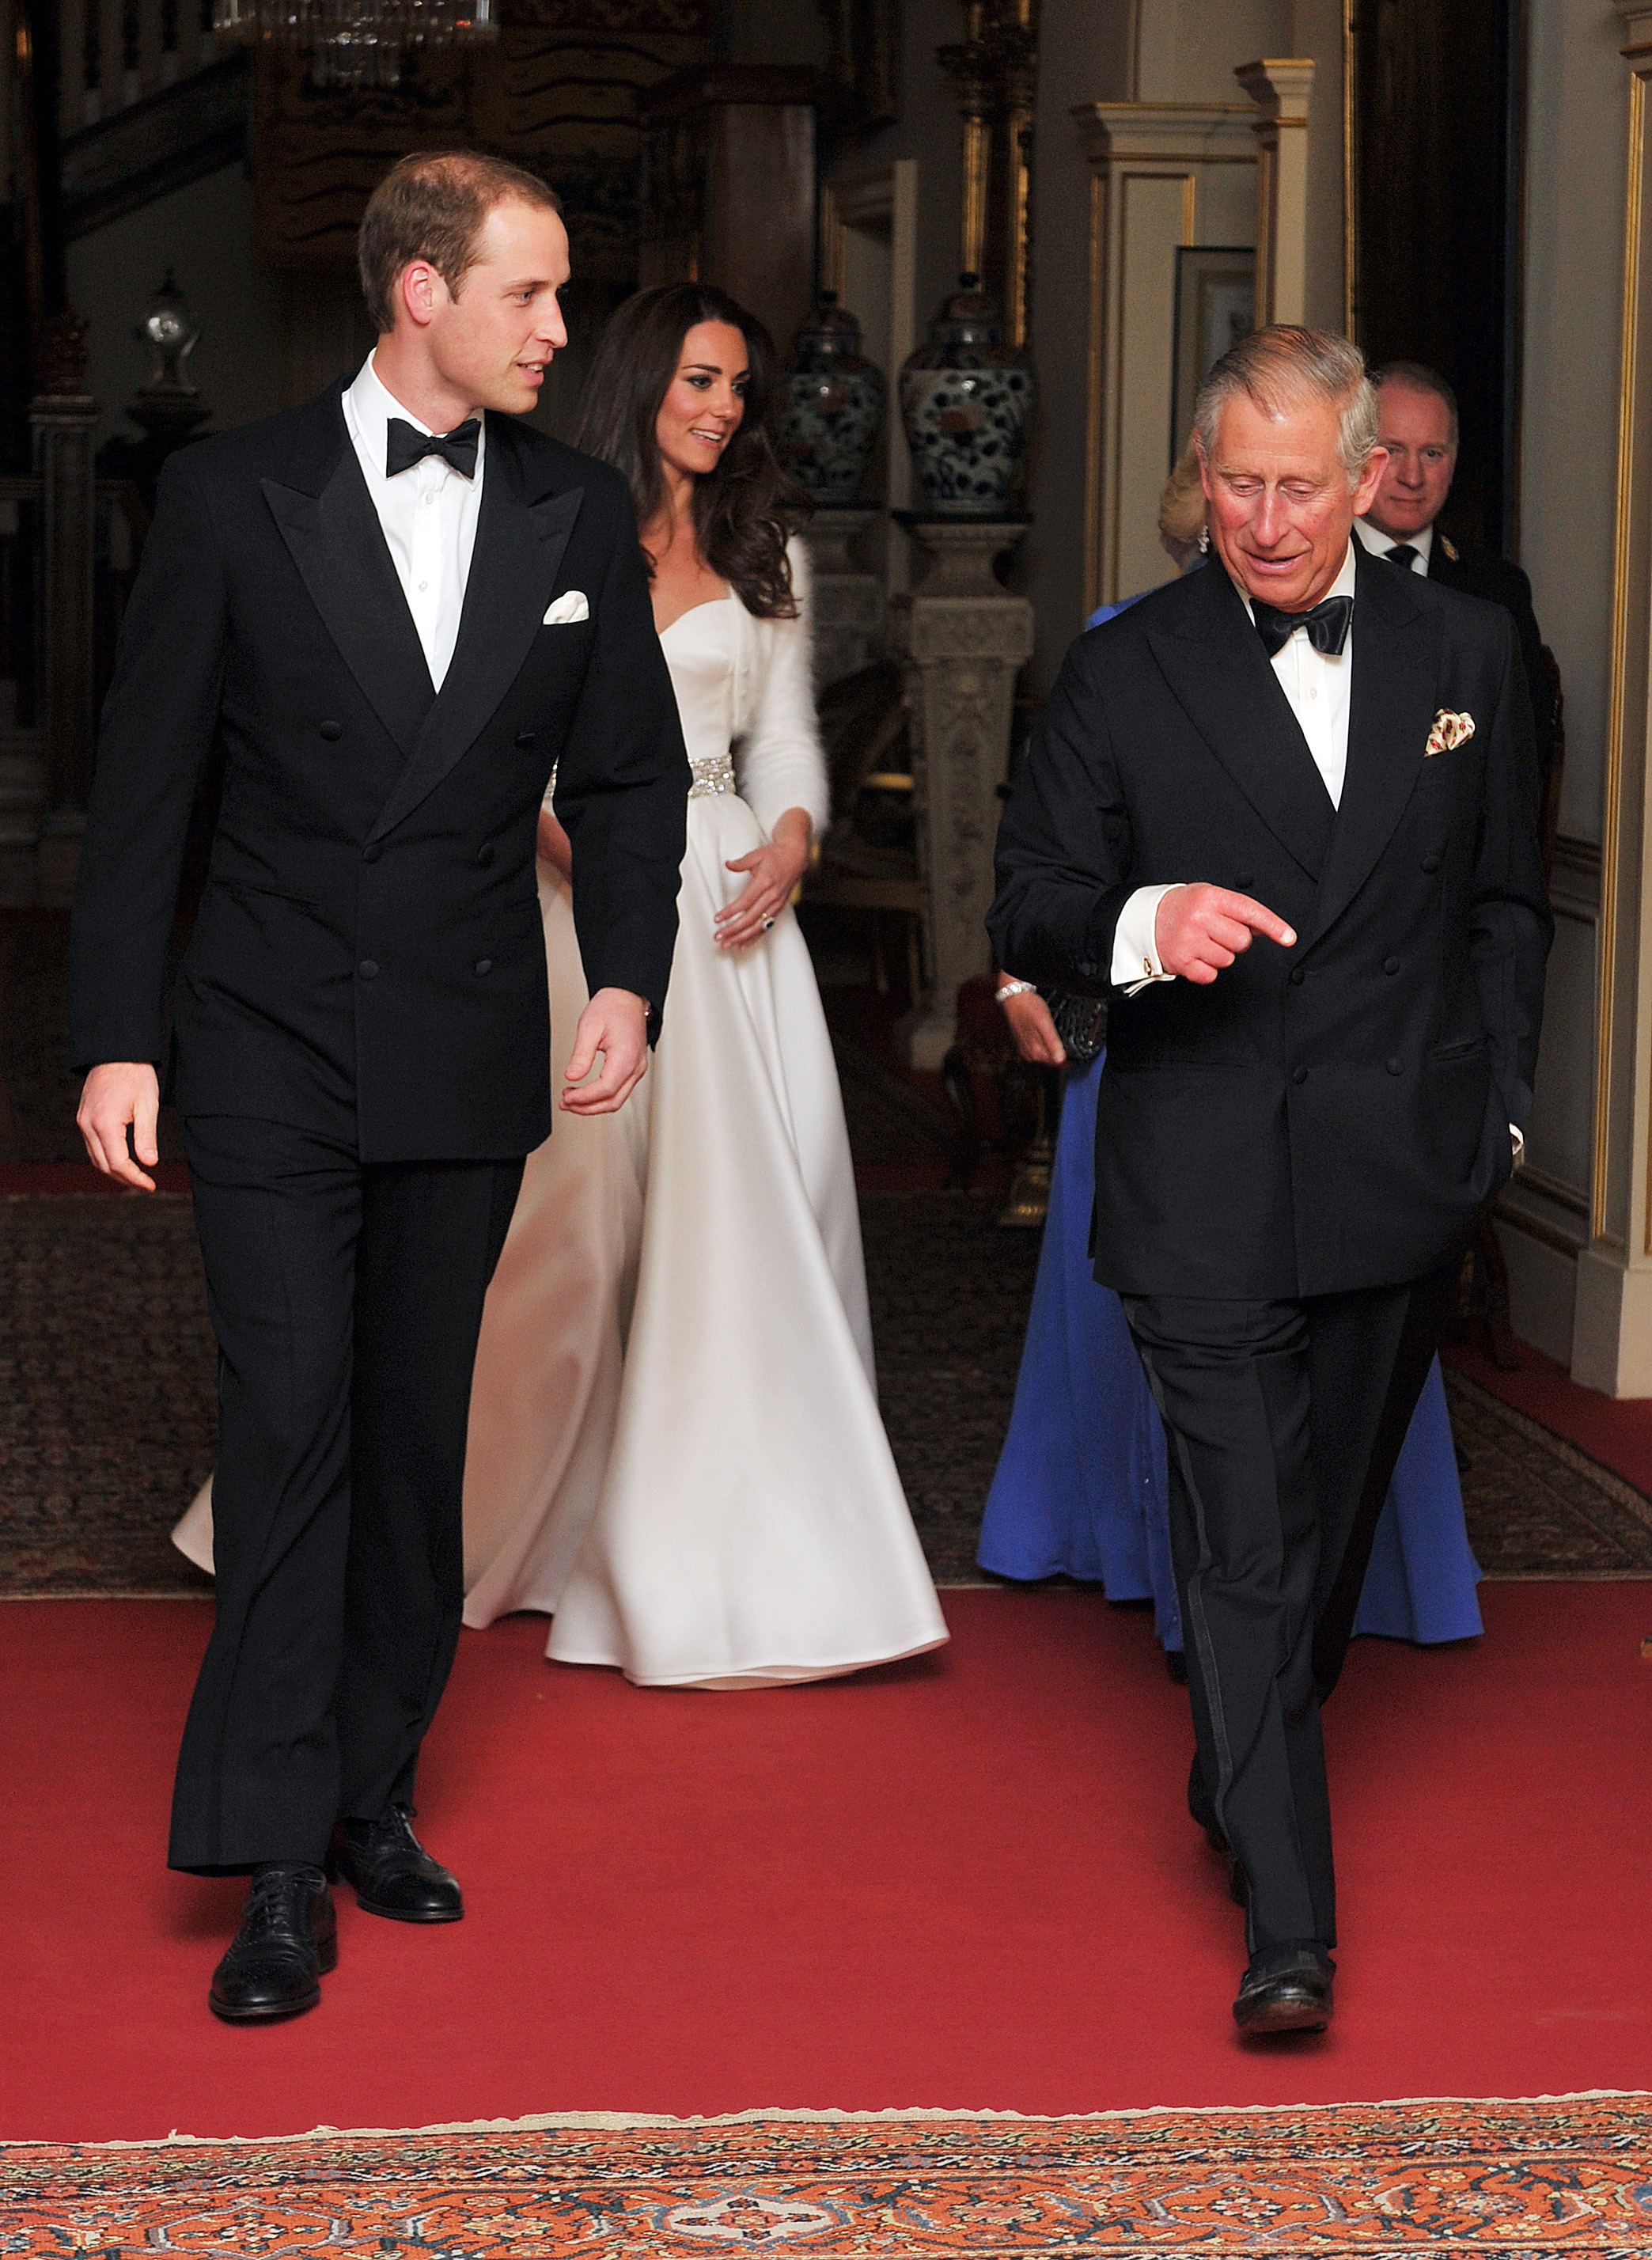 Prince William, Prince Charles, and Kate Middleton walking into Buckingham Palace ballroom for reception